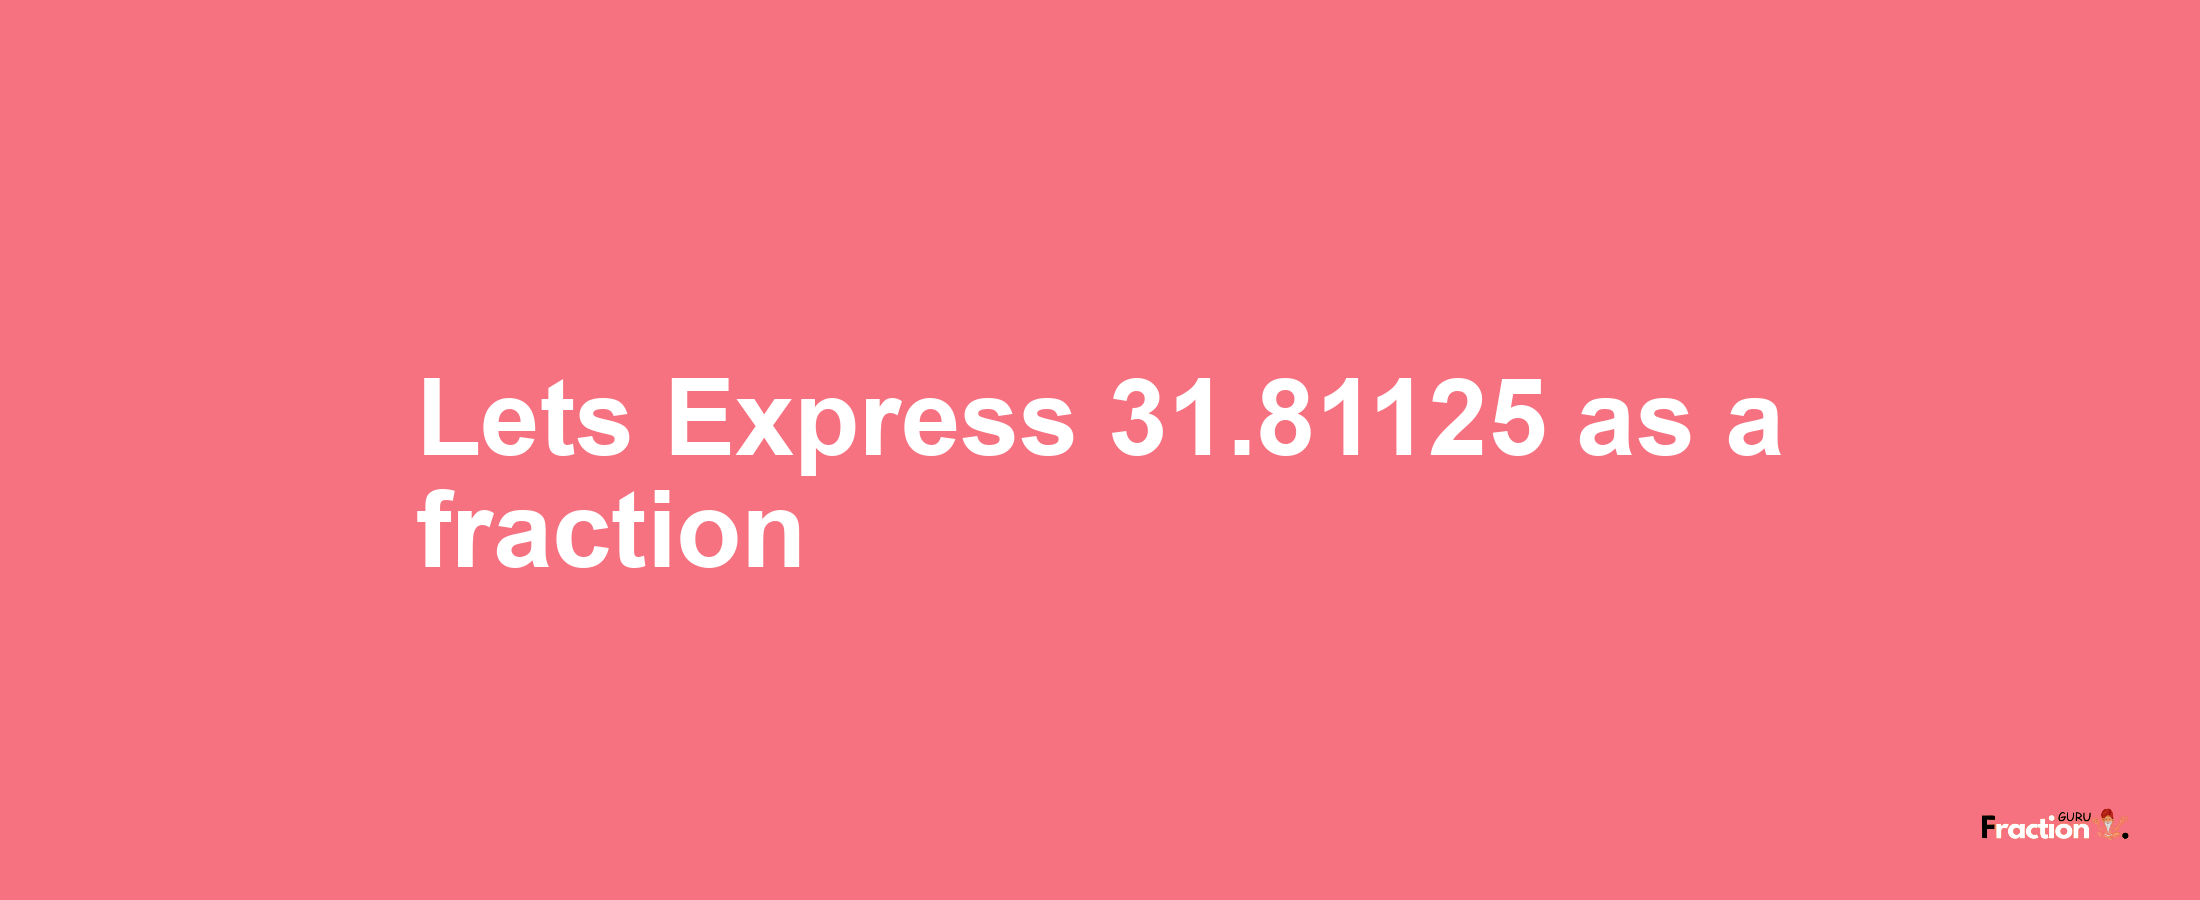 Lets Express 31.81125 as afraction